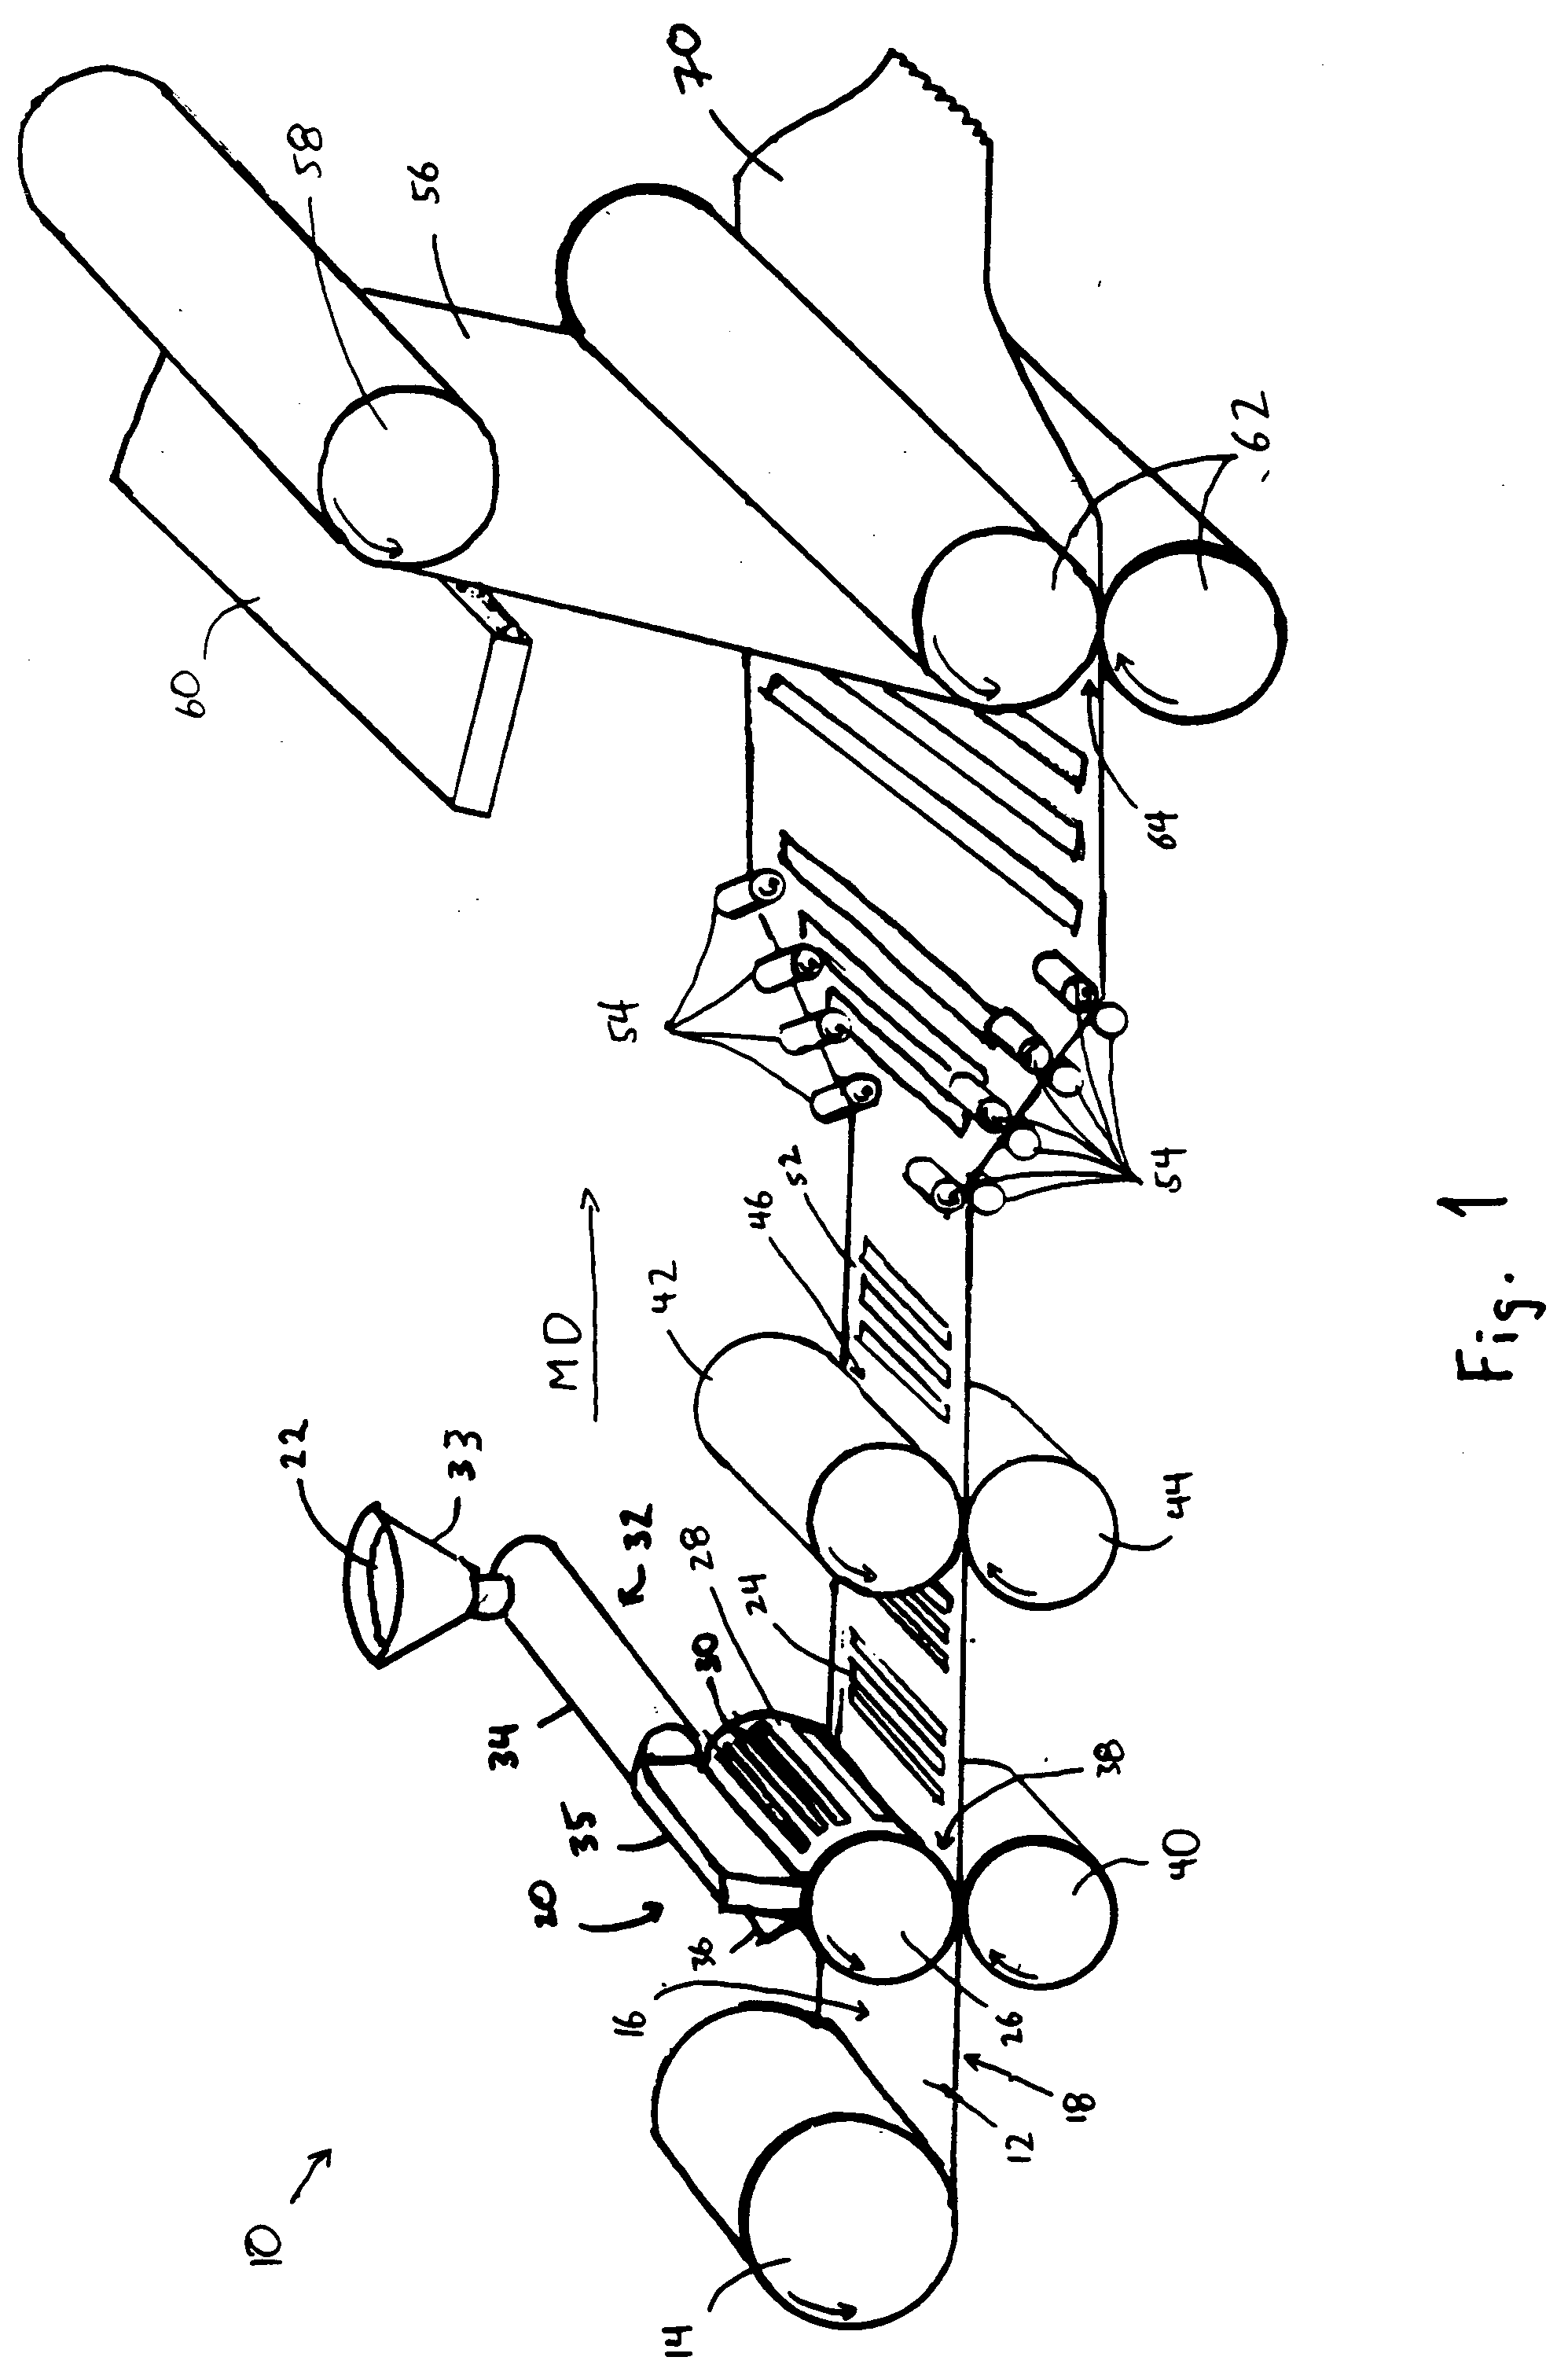 Method for producing a corrugated stretch laminate